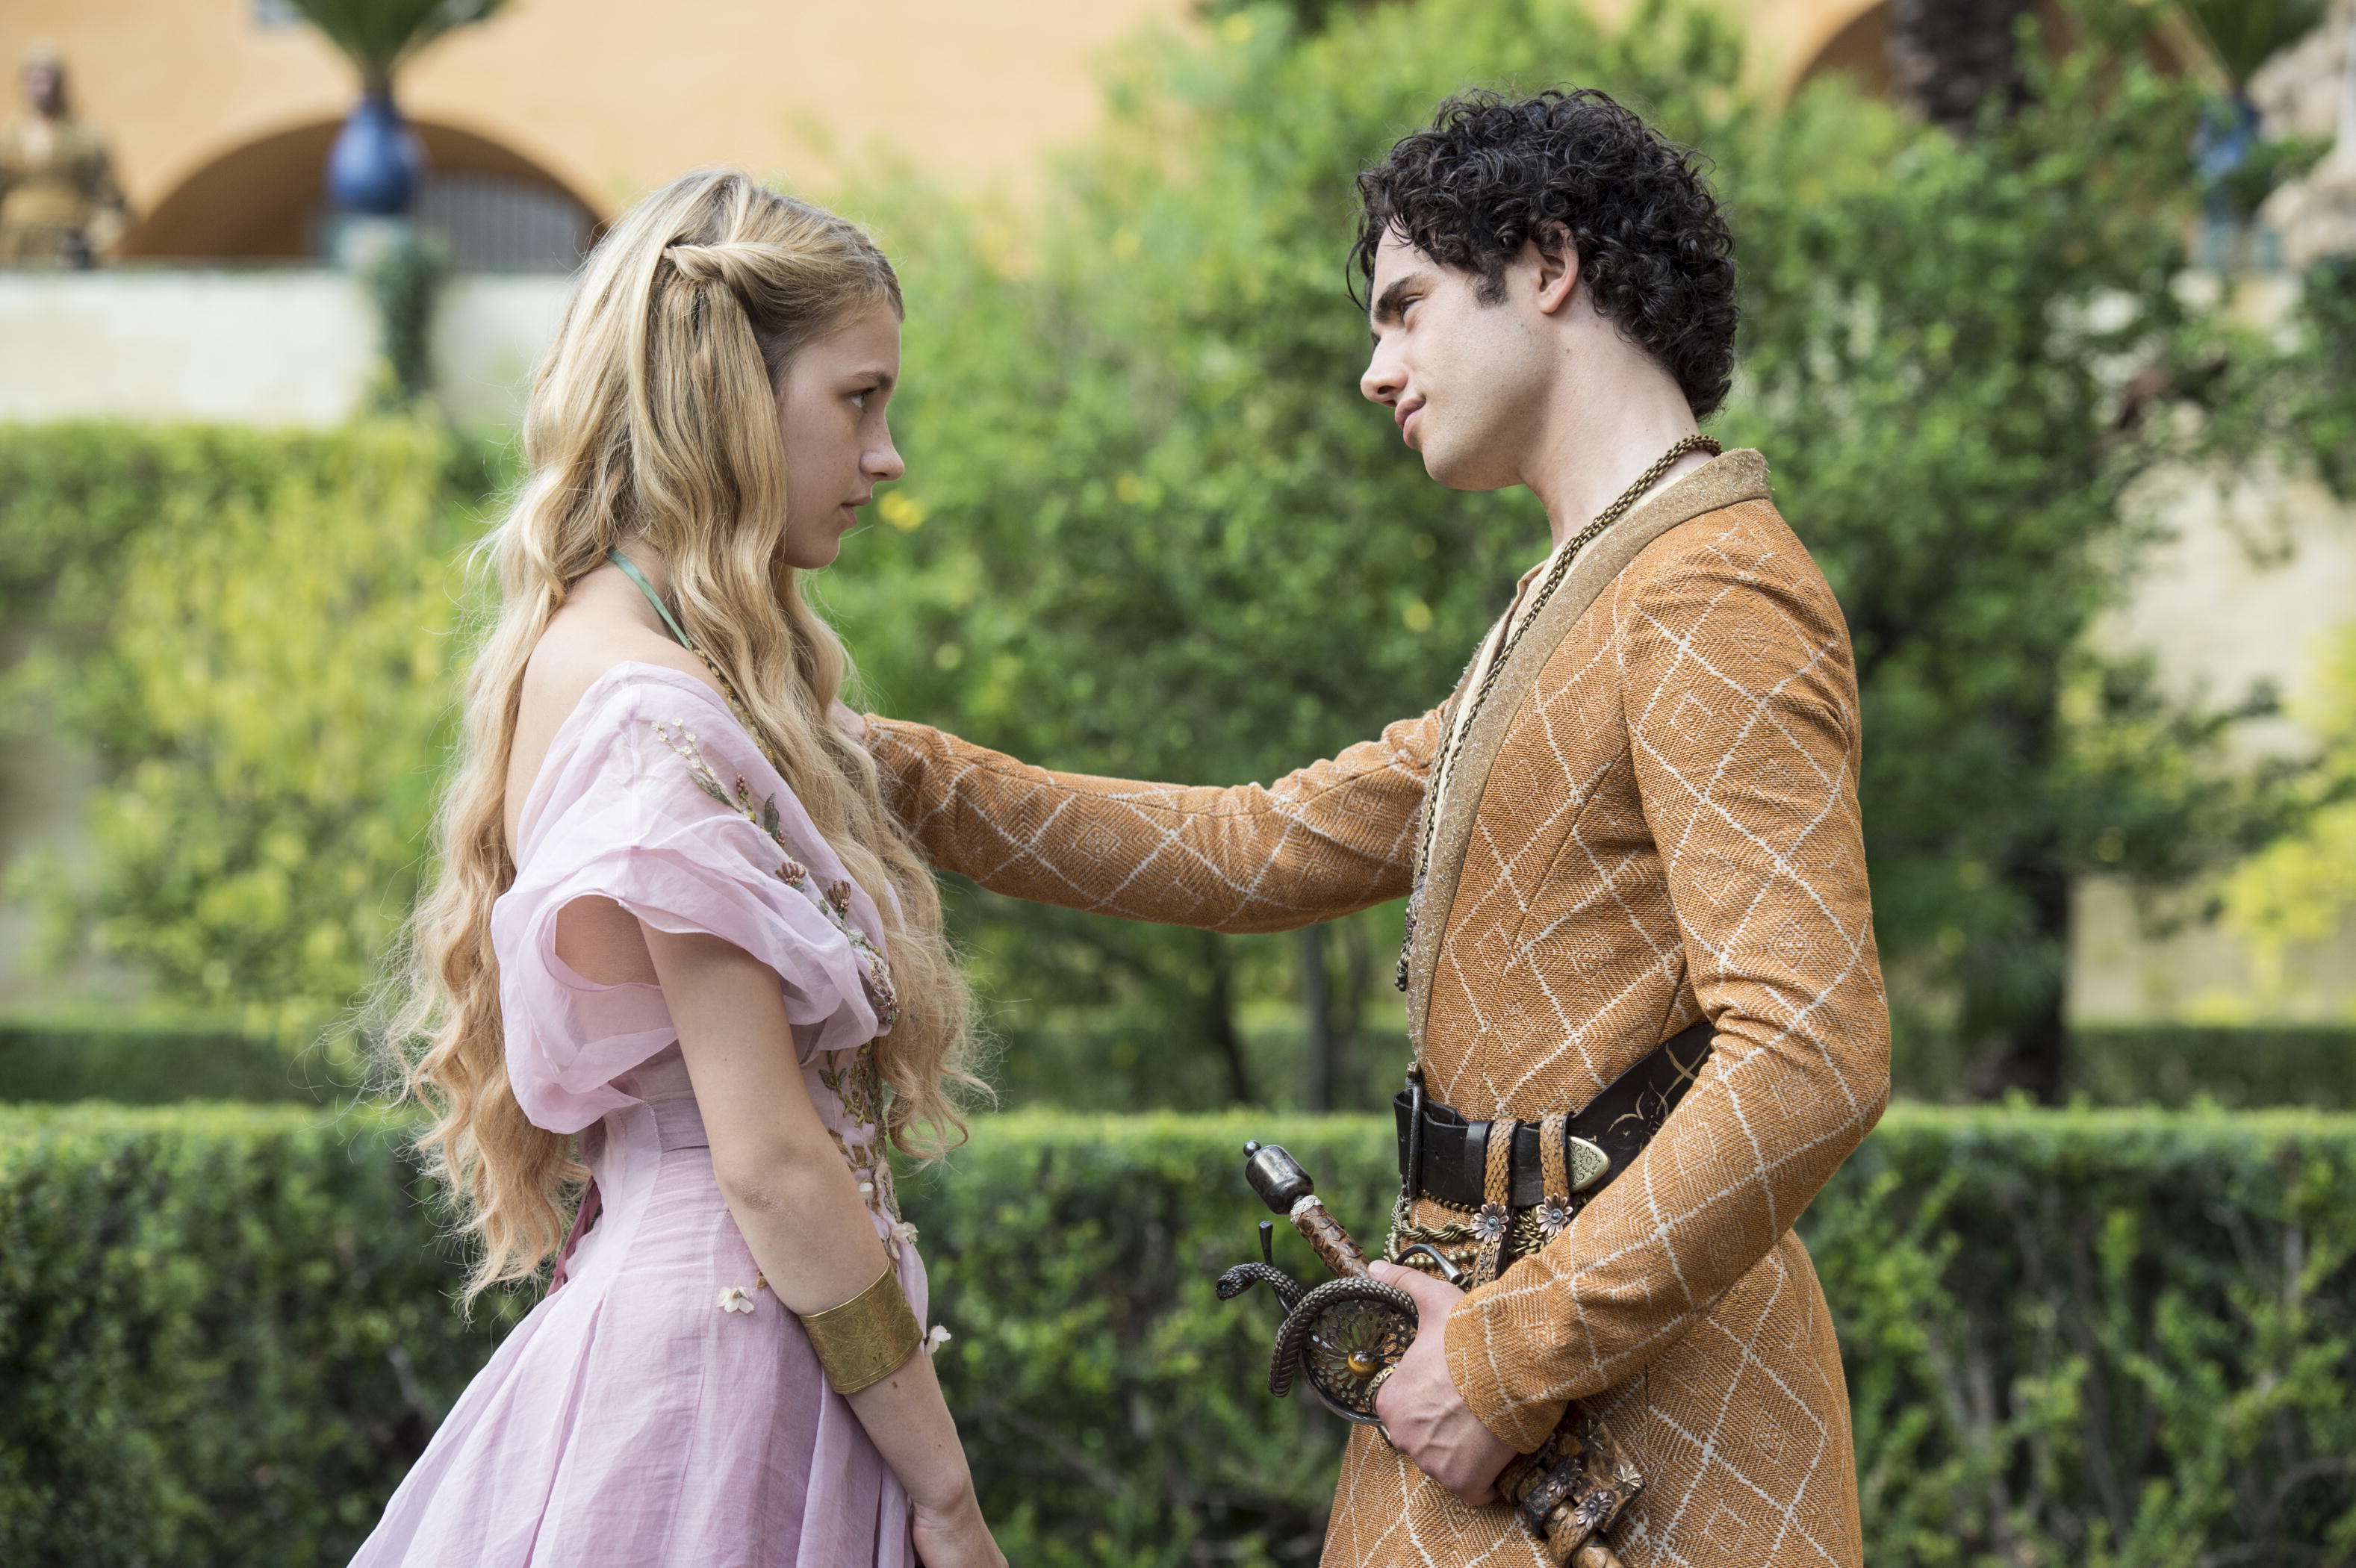 Myrcella (L), played by Nell Tiger Free, speaks with Trystane Martell (R), played by Toby Sebastian, in season 5 of HBO's "Game of Thrones."